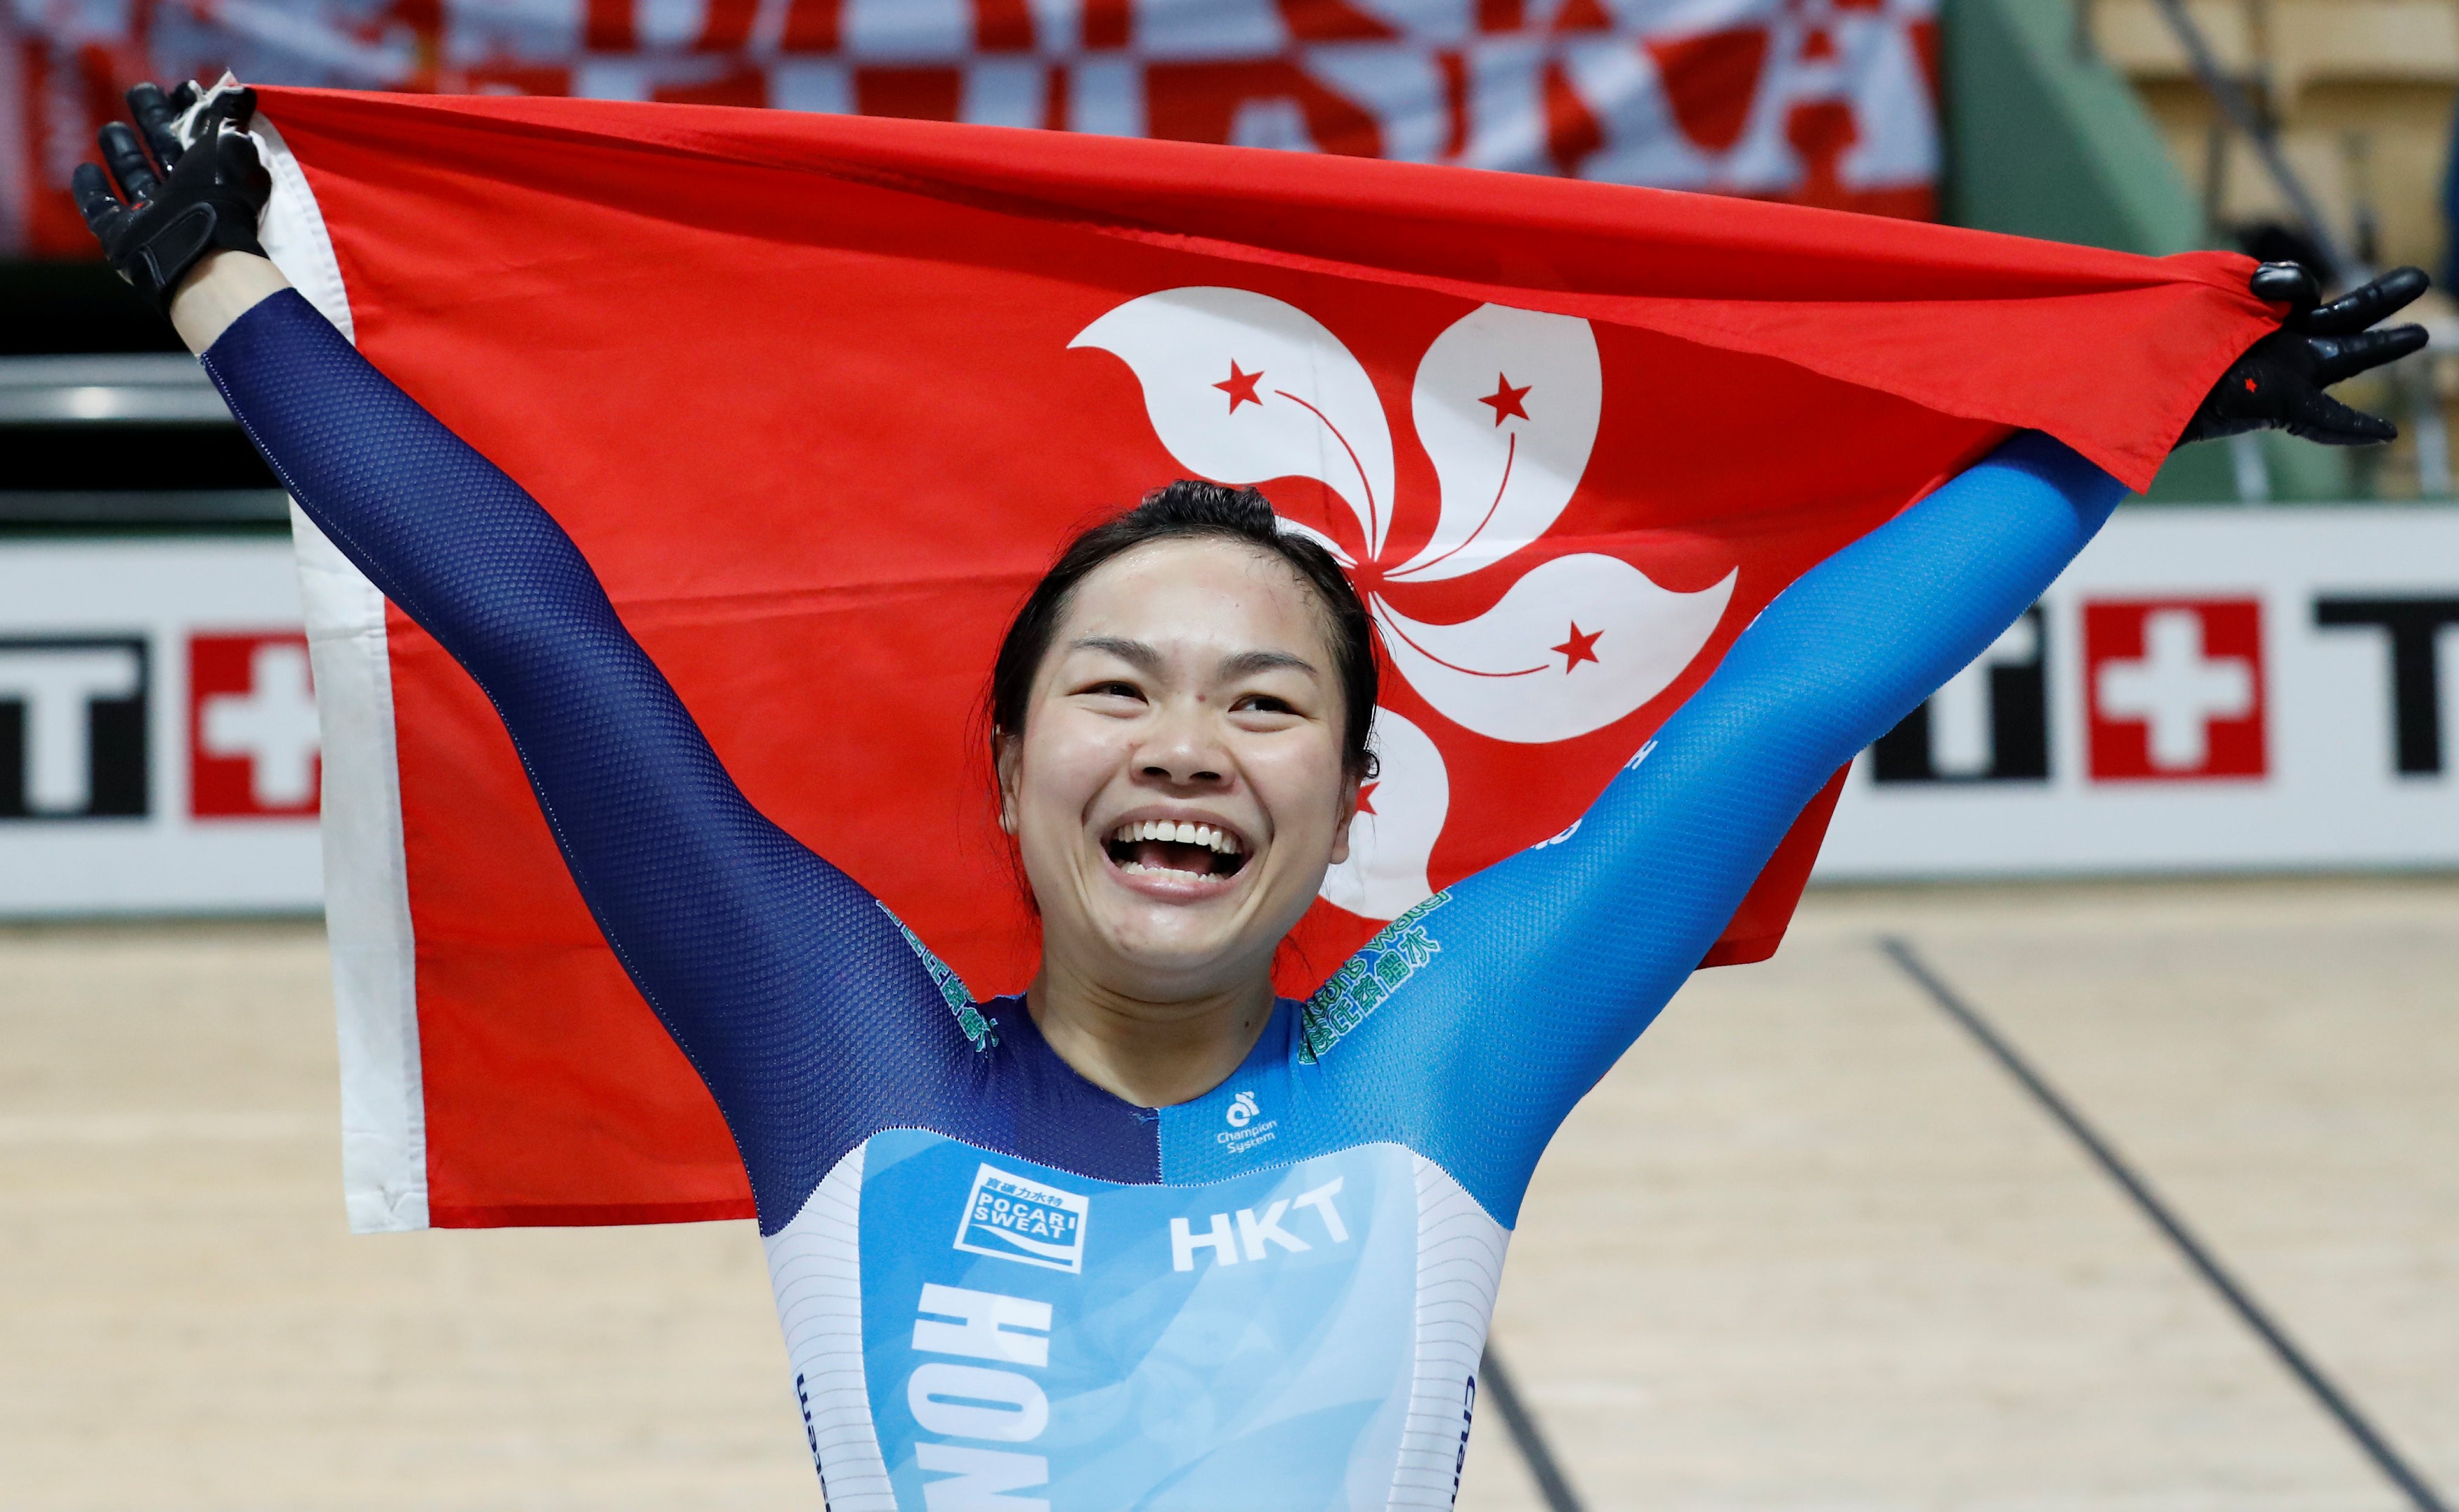 Sarah Lee celebrates winning gold in the keirin at 2019 Track Cycling World Championships in Pruszkow, Poland. Can she do it again in Berlin? Photo: Reuters